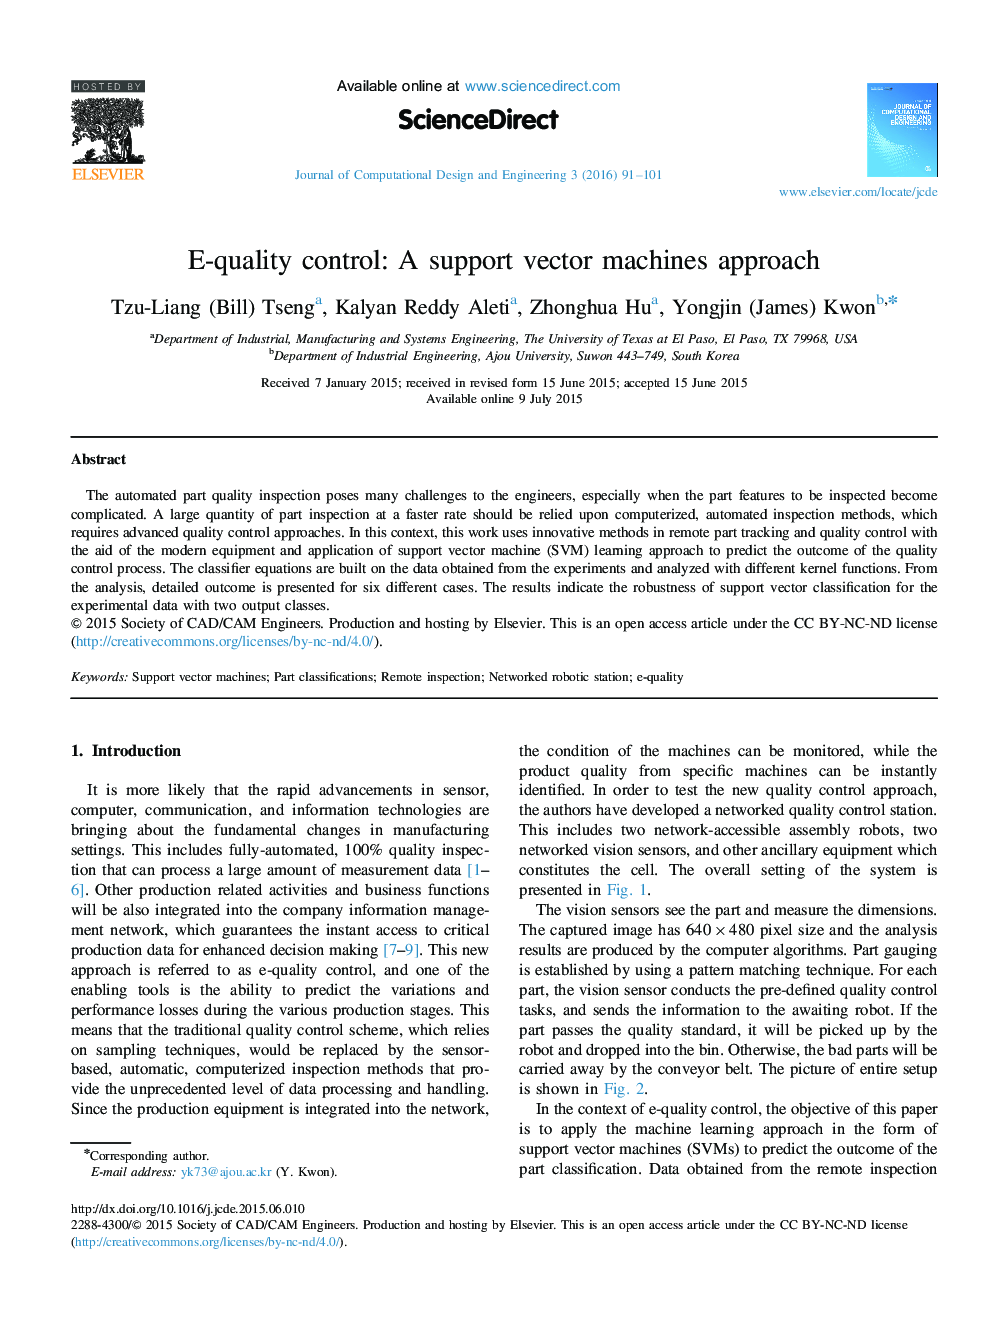 E-quality control: A support vector machines approach